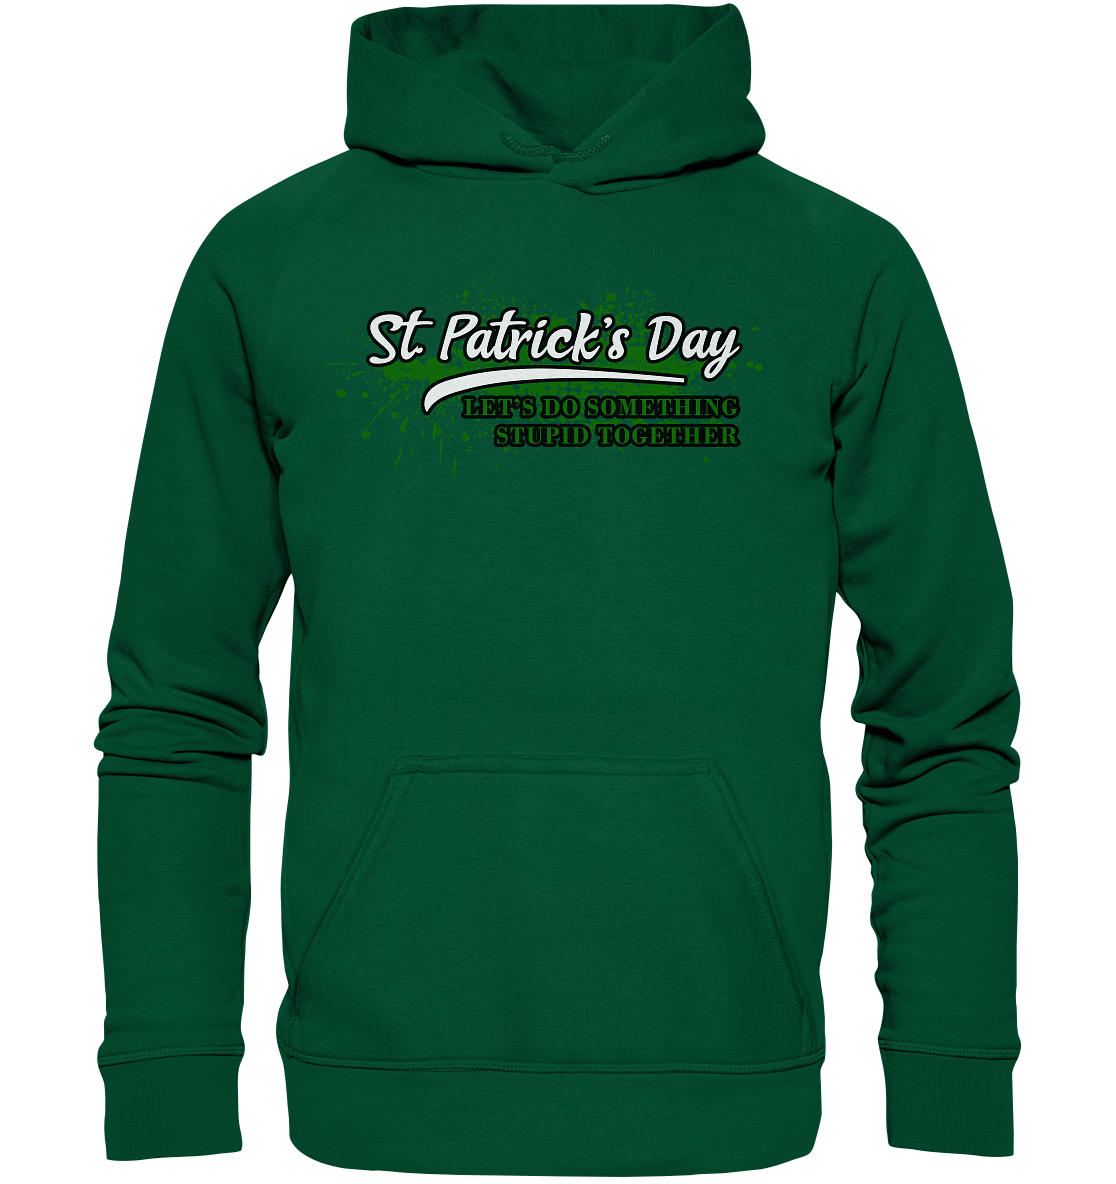 St. Patrick's Day "Let's Do Something Stupid Together" - Basic Unisex Hoodie